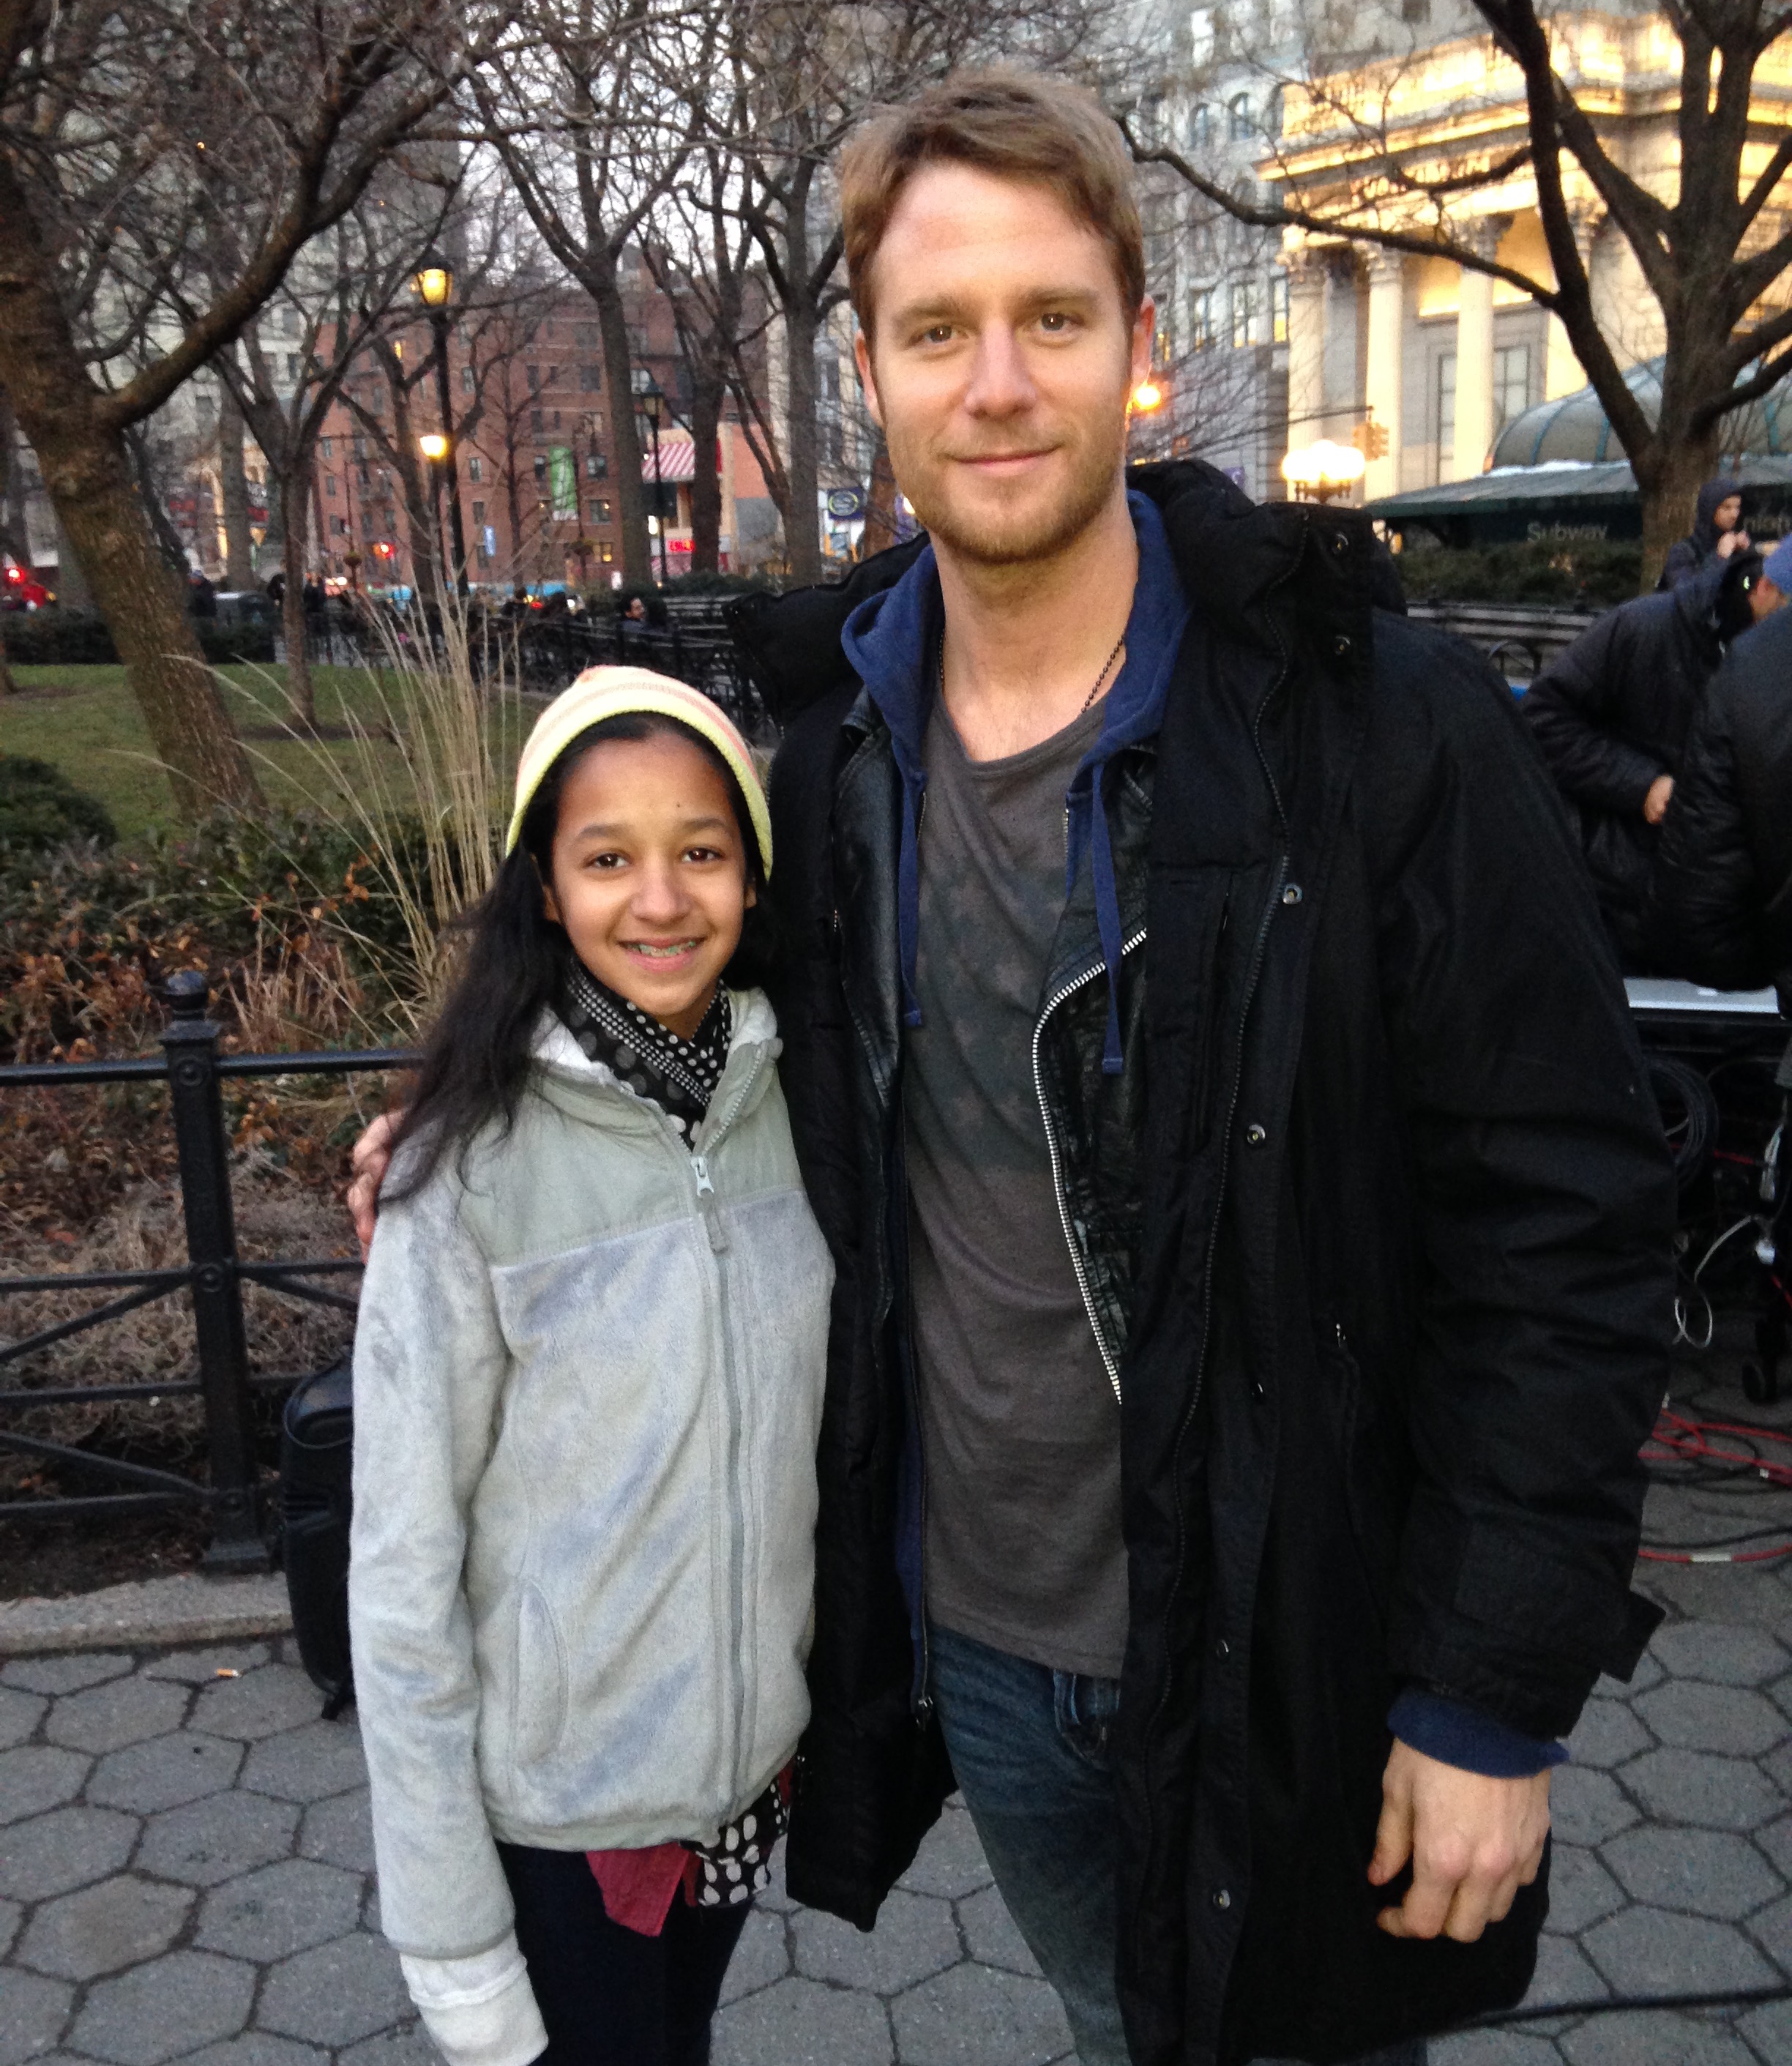 Chetna with hollywood actor Jake McDorman on the set of CBS TV show 'Limitless'.